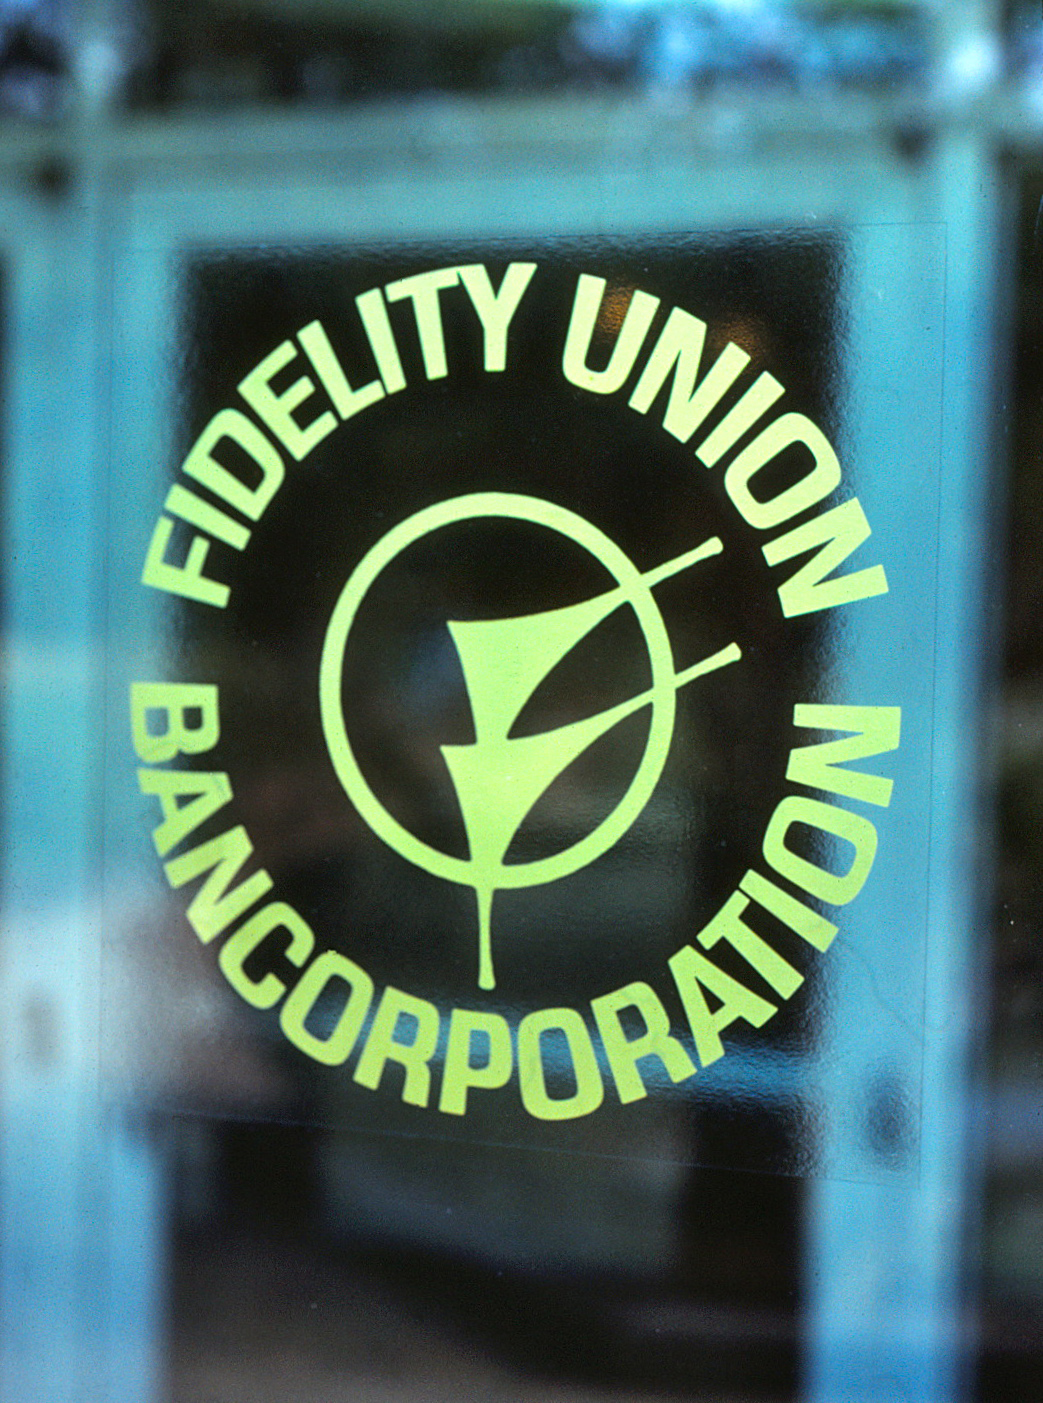 Photo of the old Fidelity Union Bancorporation logo and circular text around it.